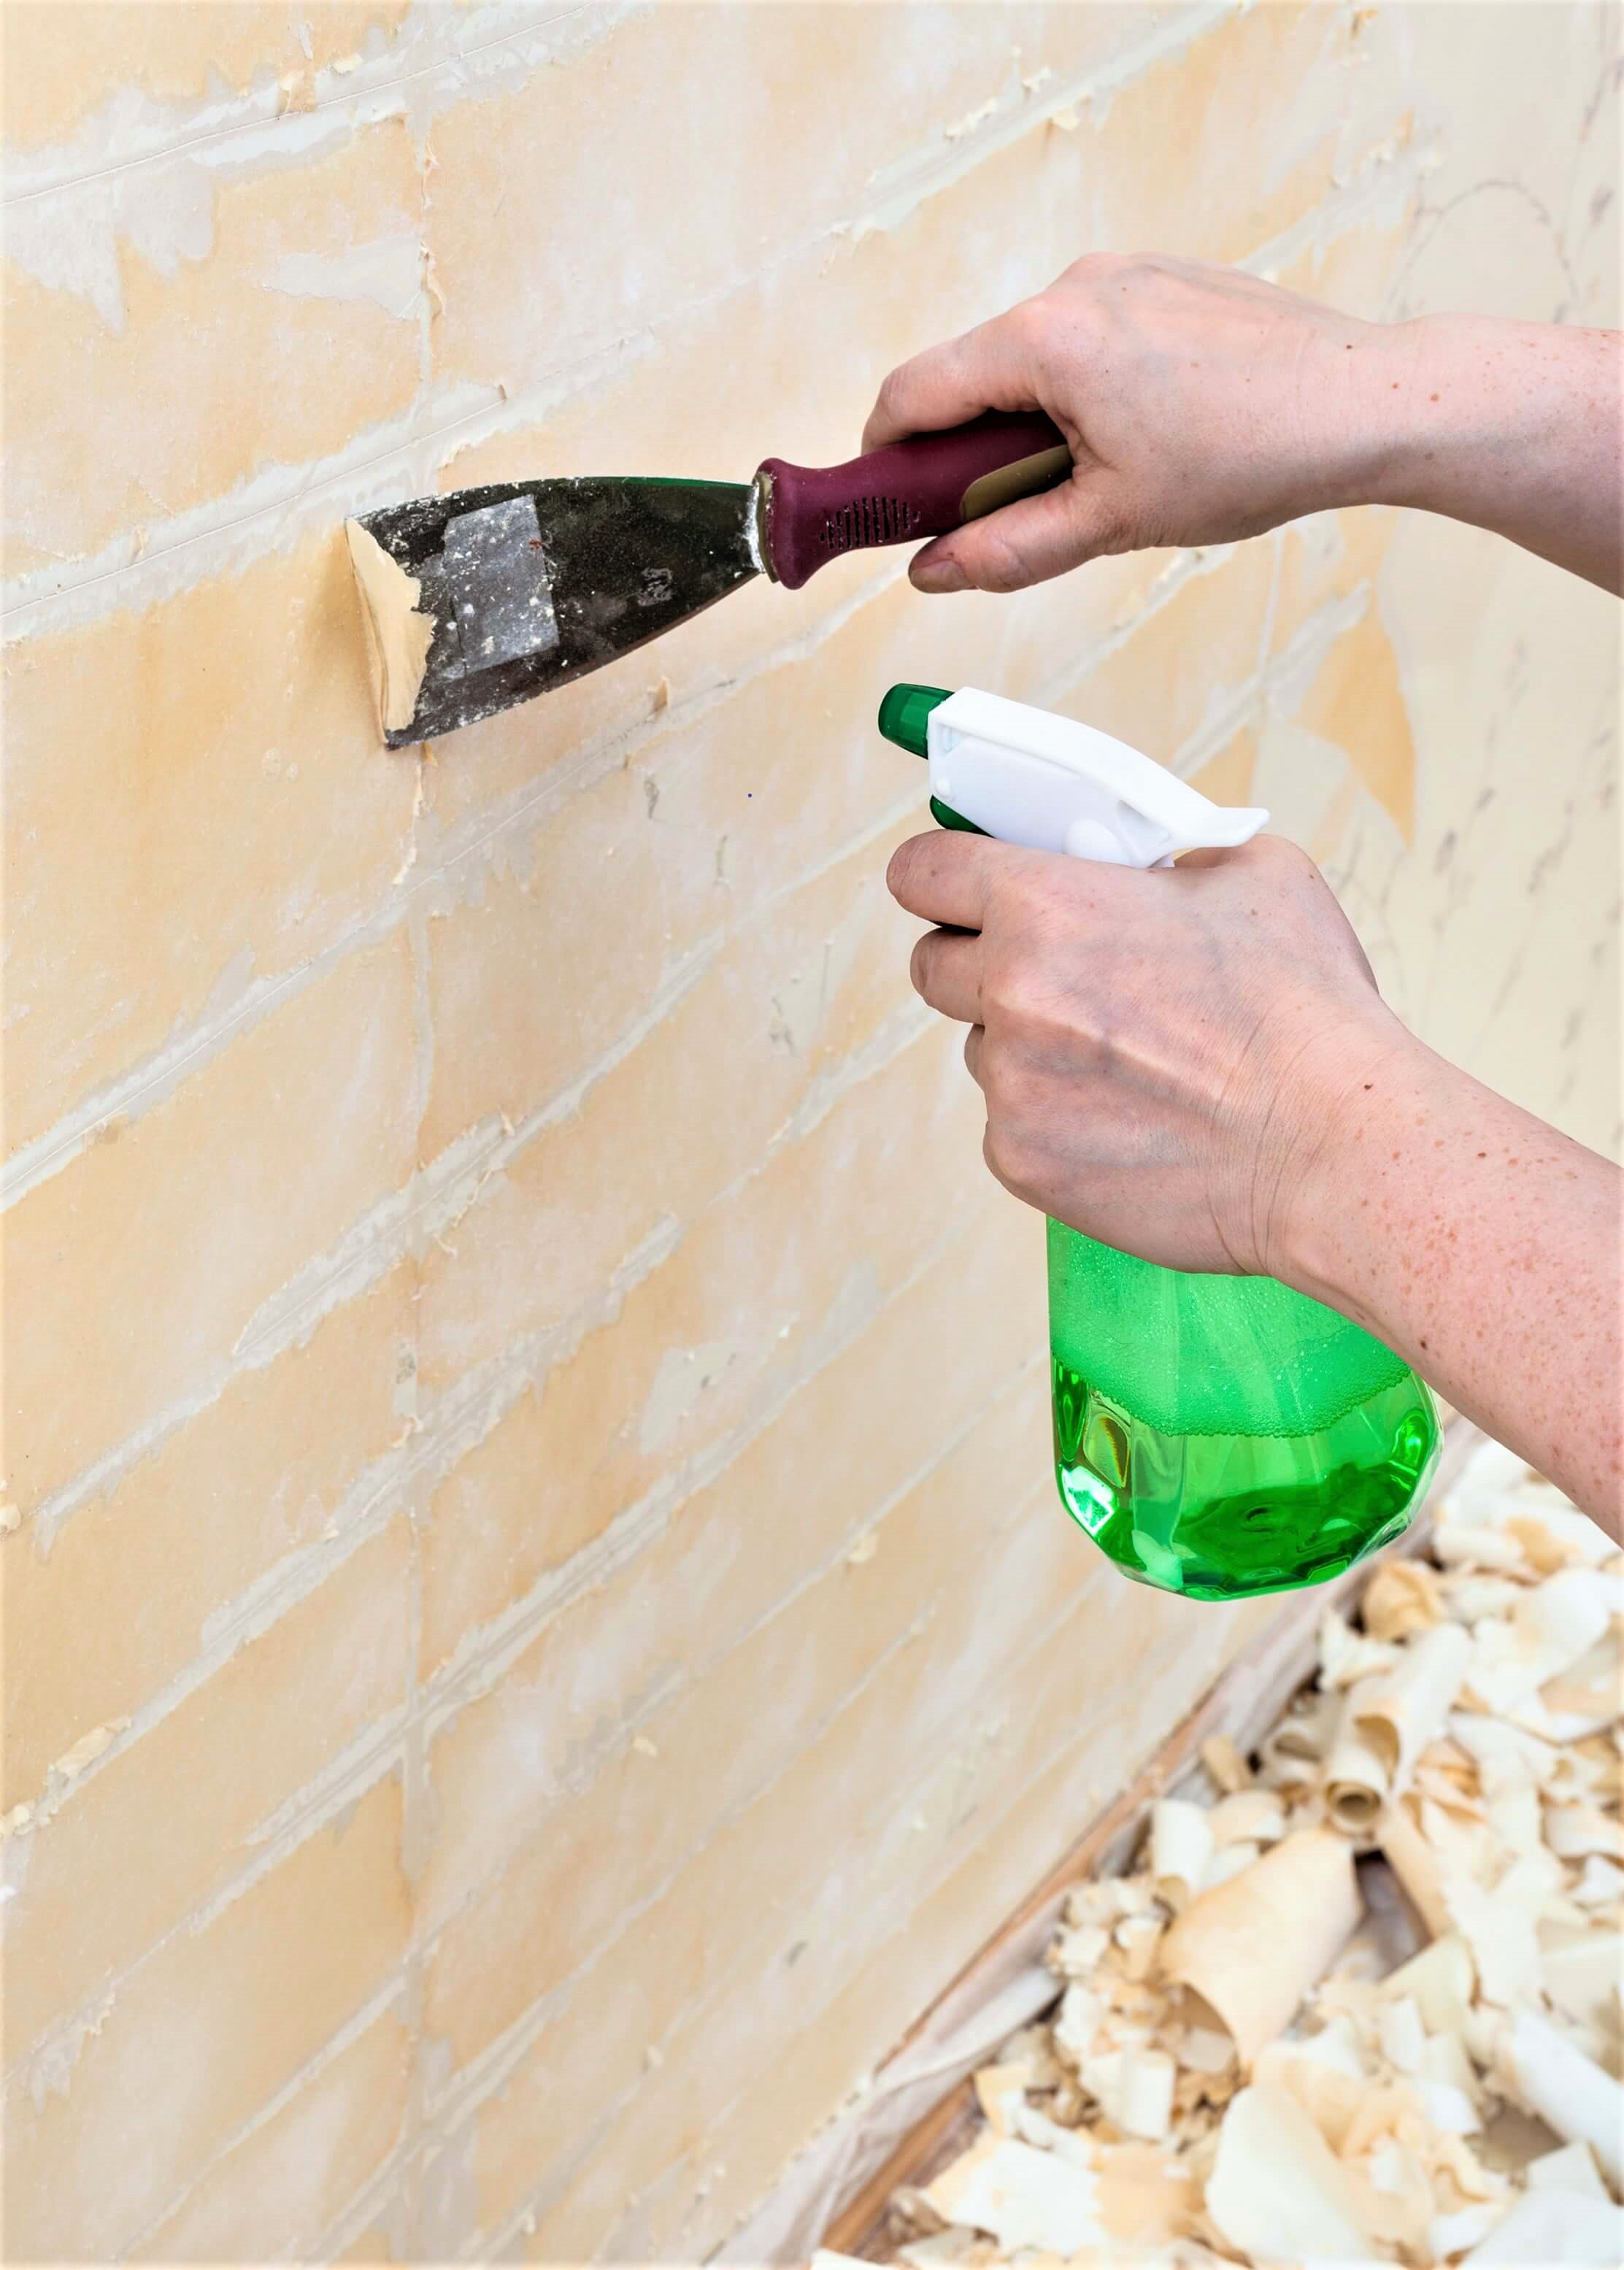 How to Remove Wallpaper - Best Ways to Easily Remove Wallpaper